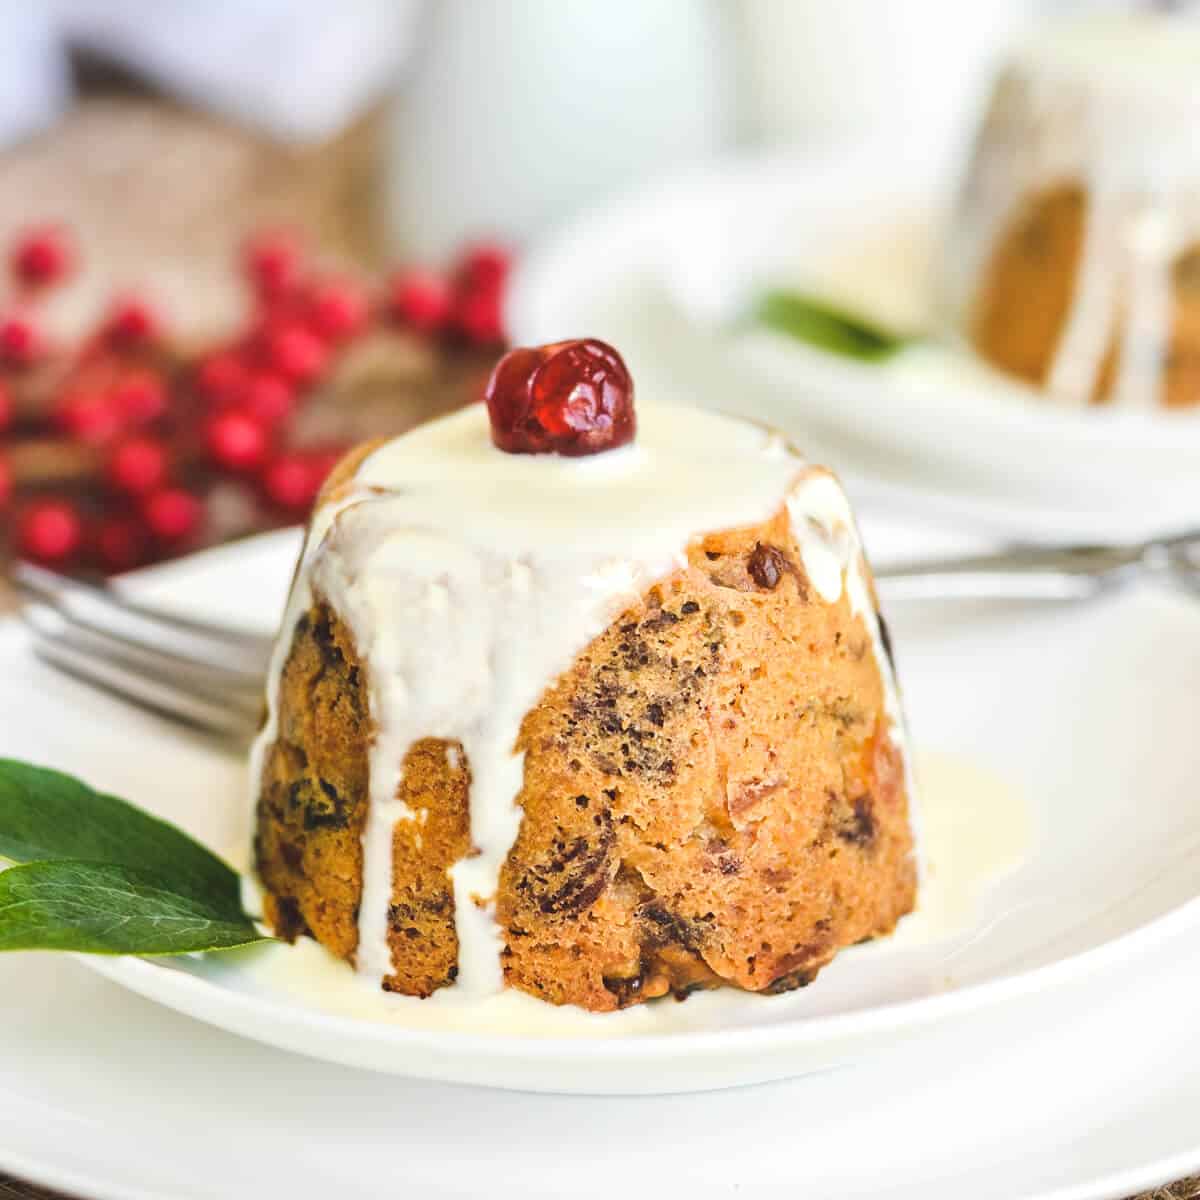 Mini Christmas Steamed Puddings - The Cooking Collective